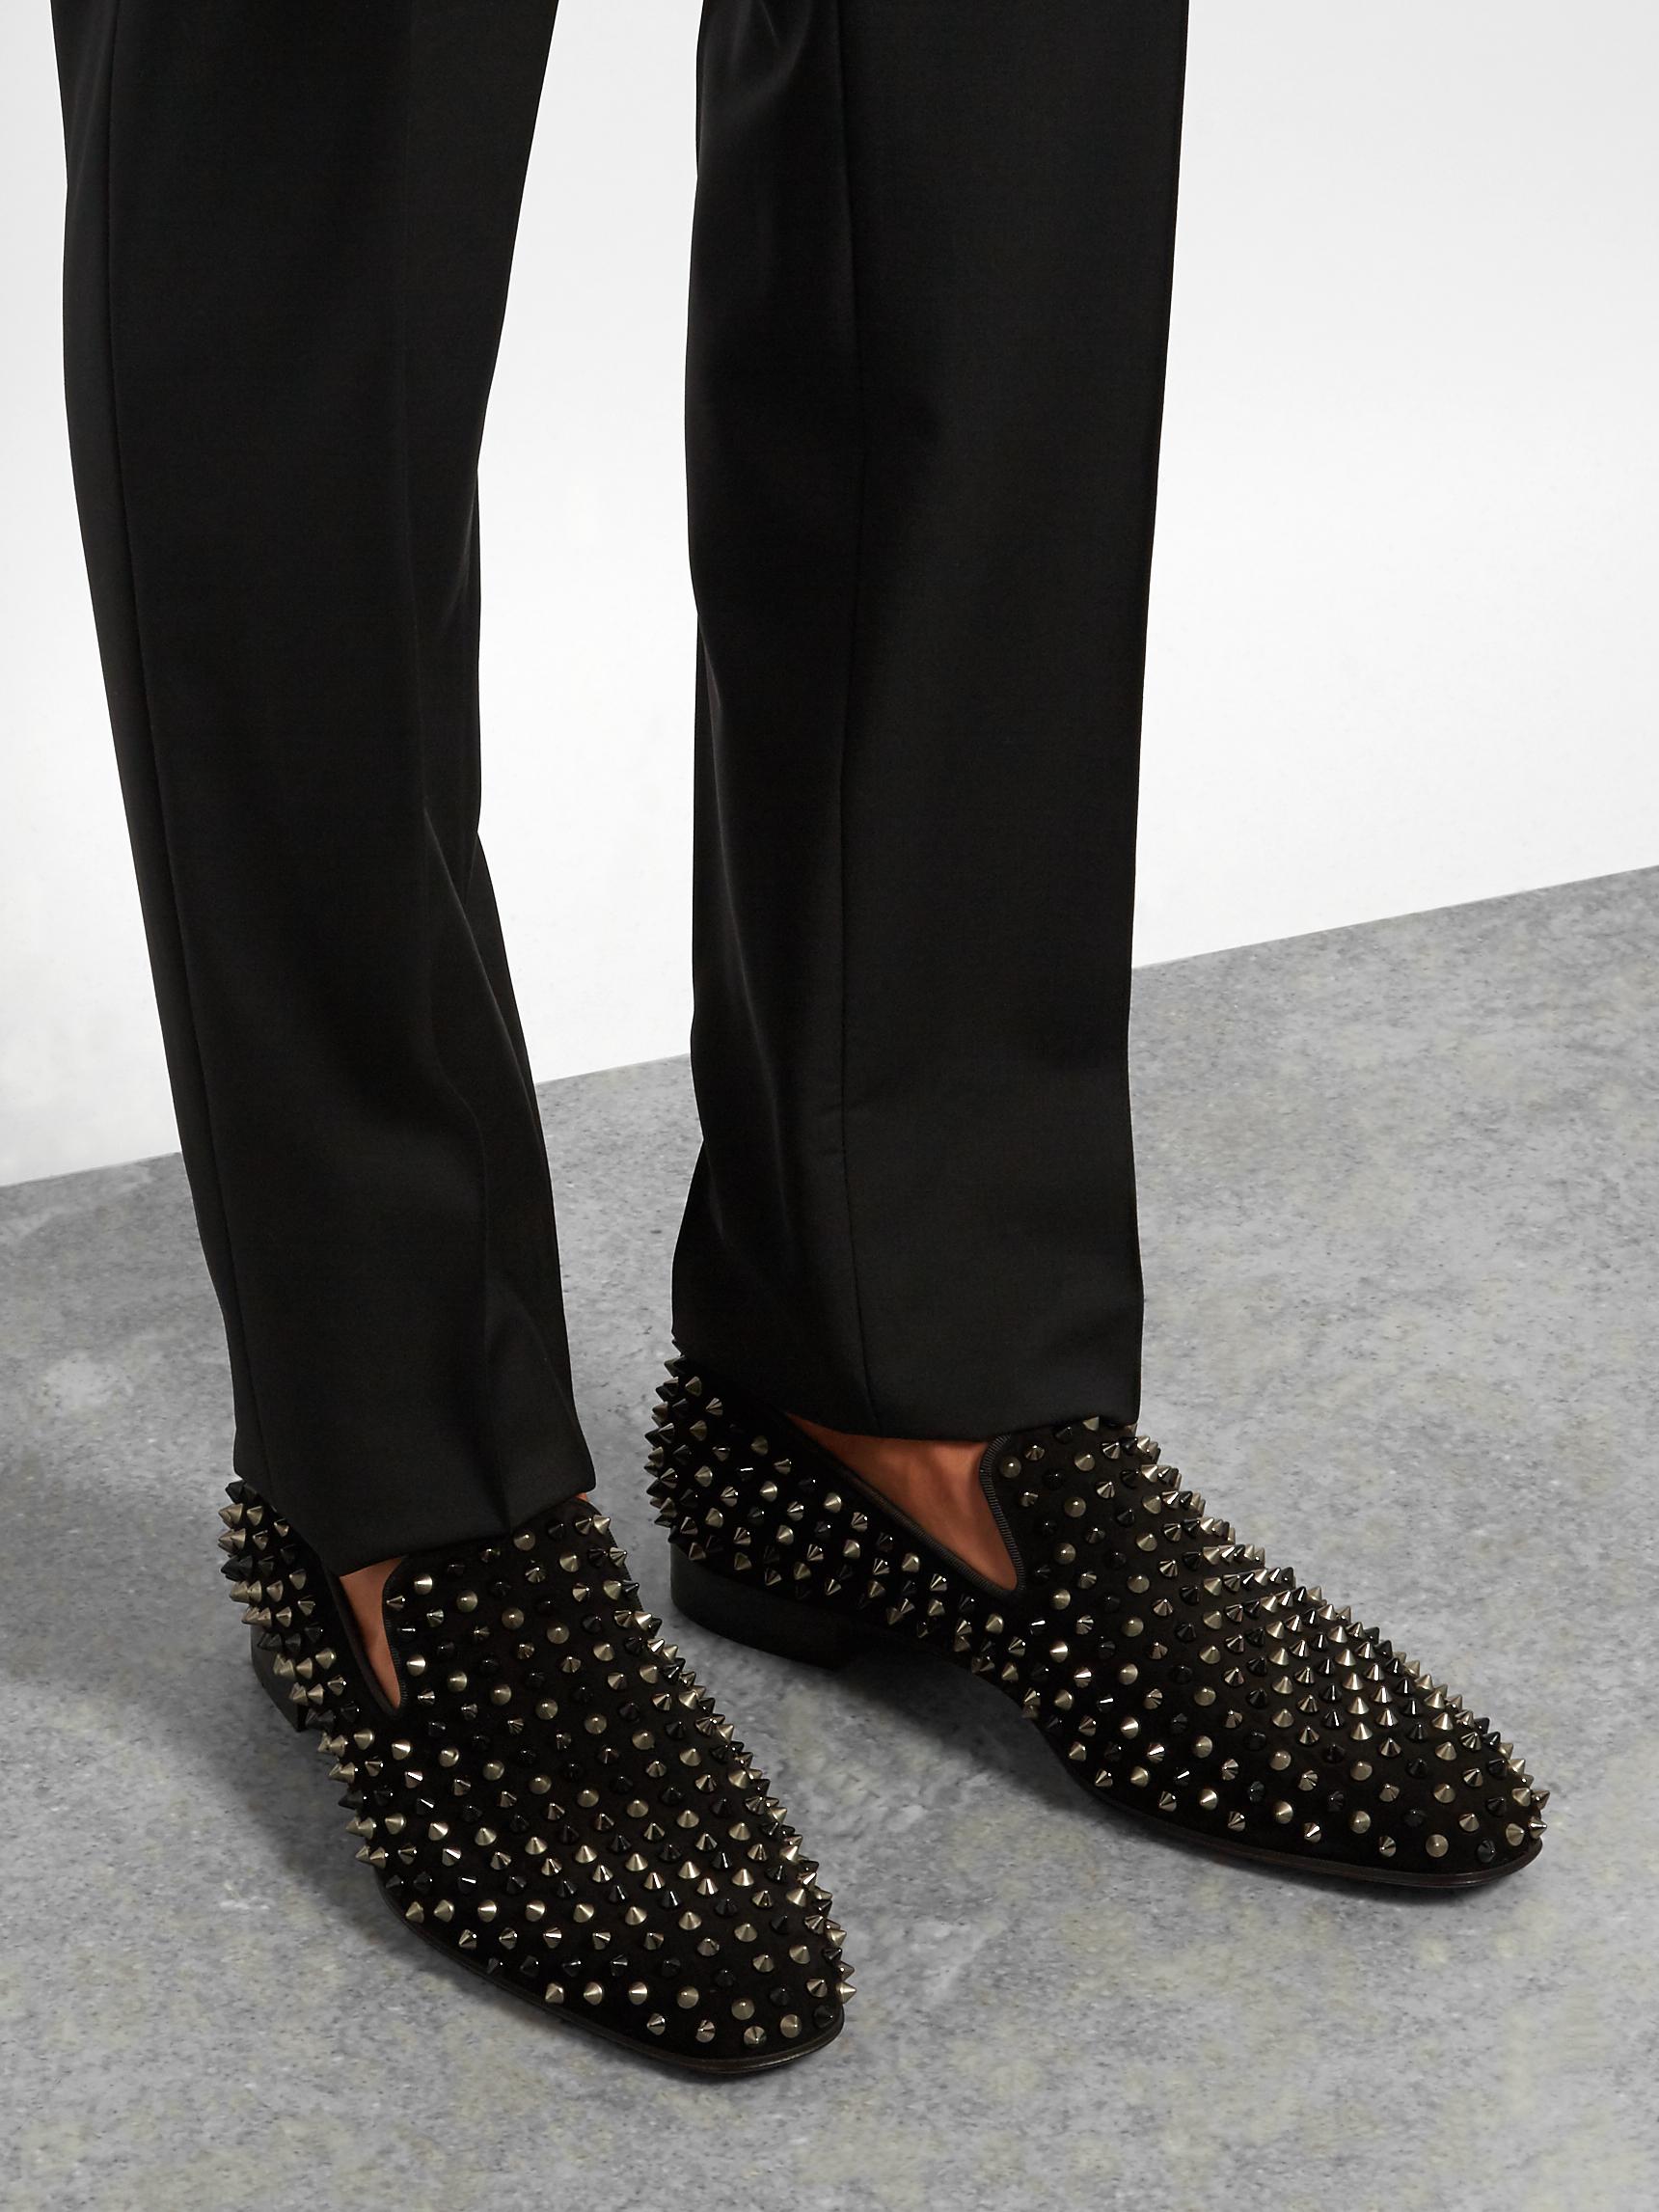 Christian Louboutin Men's Dandelion Spikes Leather Loafers